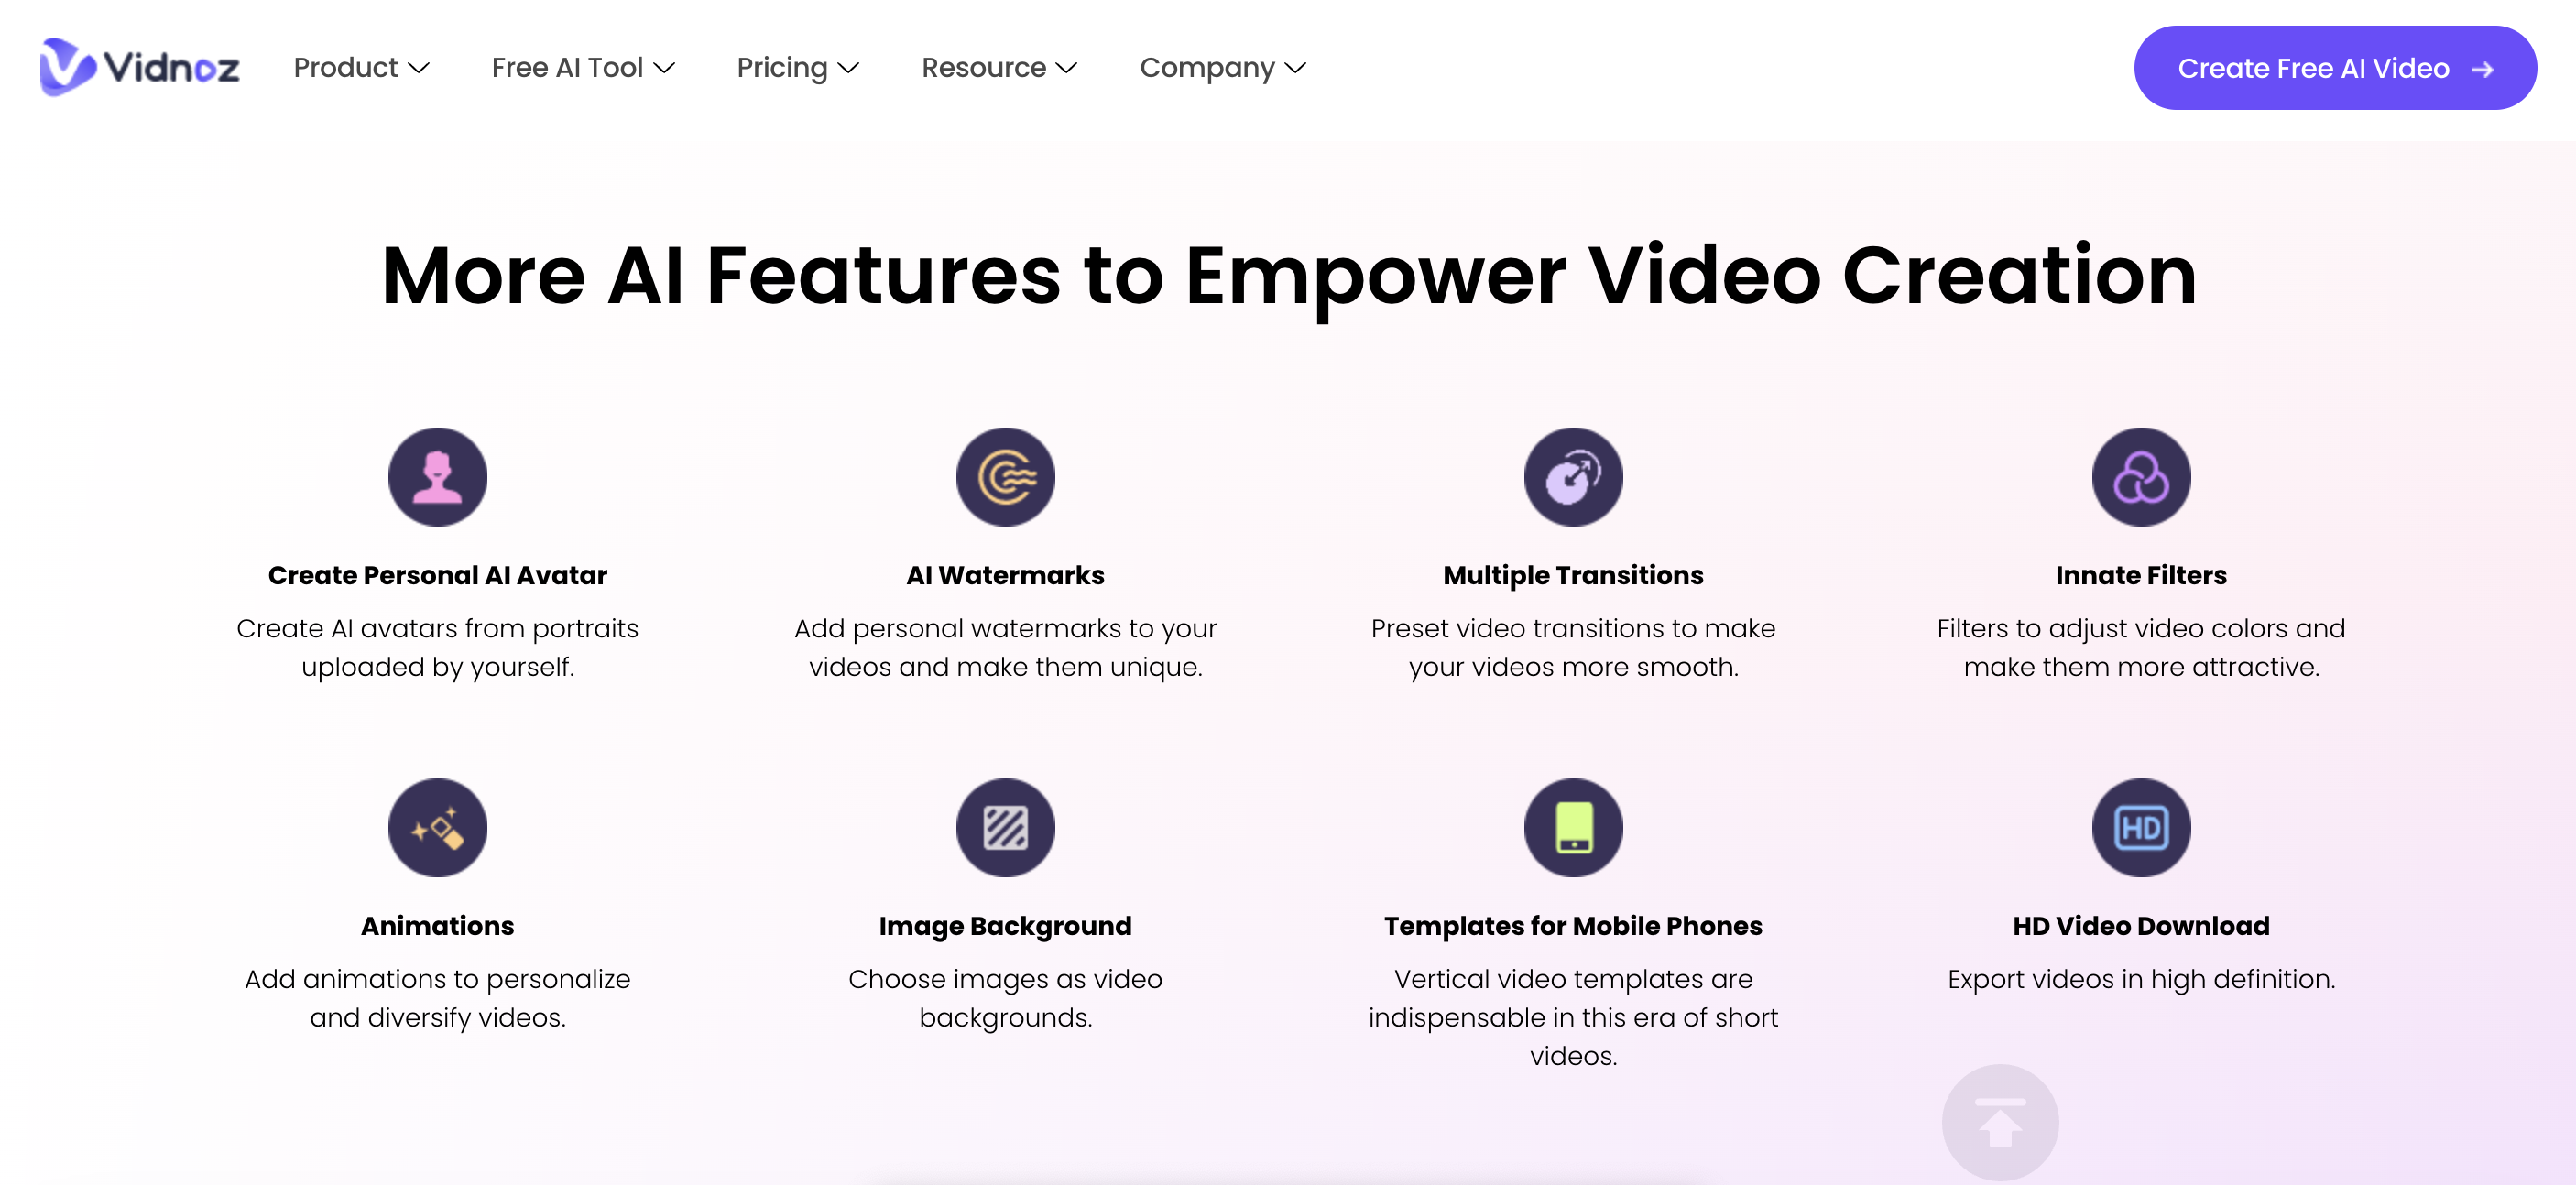 More AI Features Of Vidnoz AI